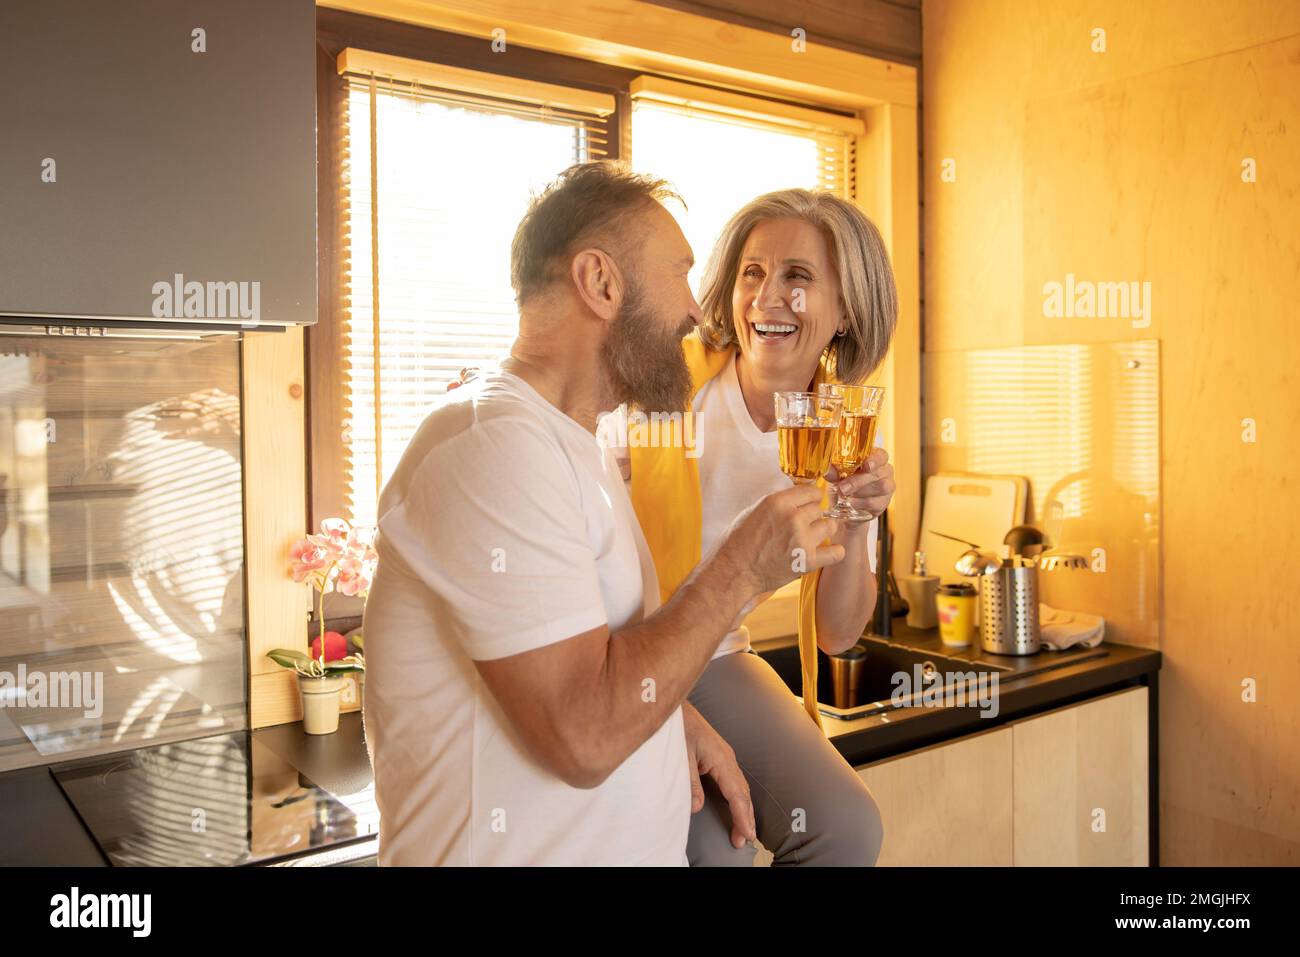 Married couple looking enjoyed and happy while having a glass of wine Stock Photo